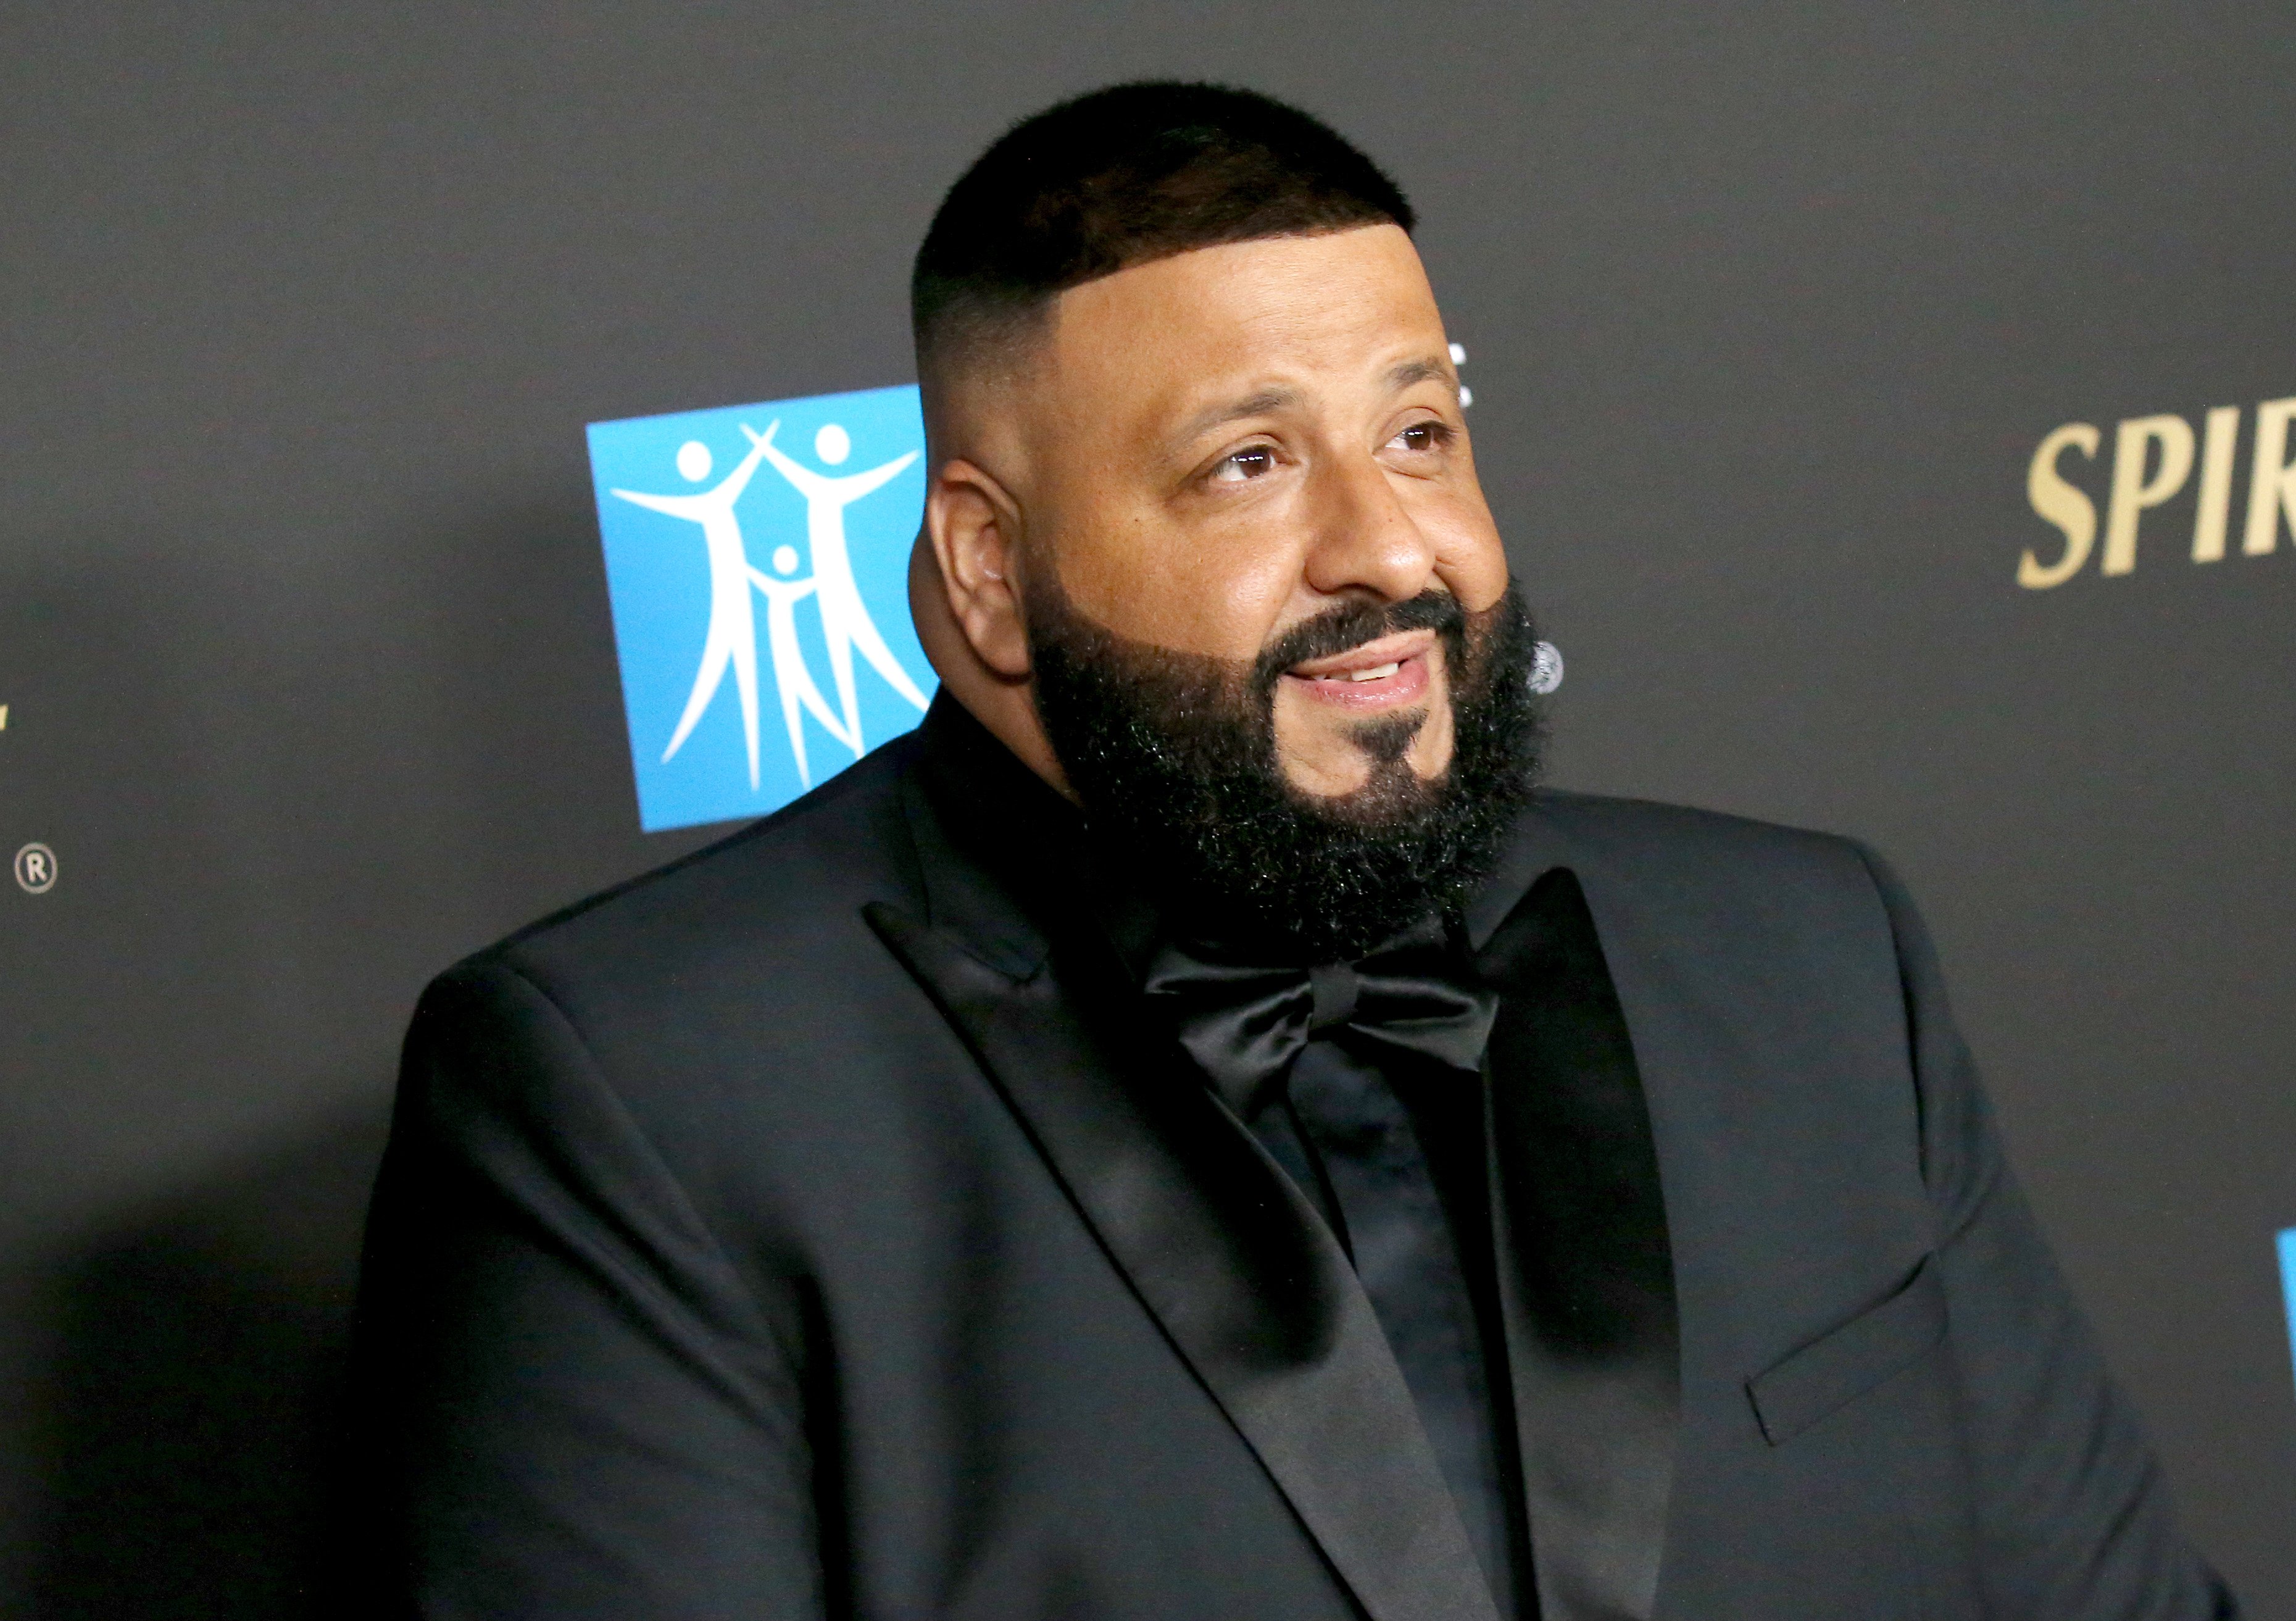  DJ Khaled at the City Of Hope's Spirit of Life 2019 Gala held at The Barker Hangar on October 10, 2019 in Santa Monica, California.| Source: Getty Images